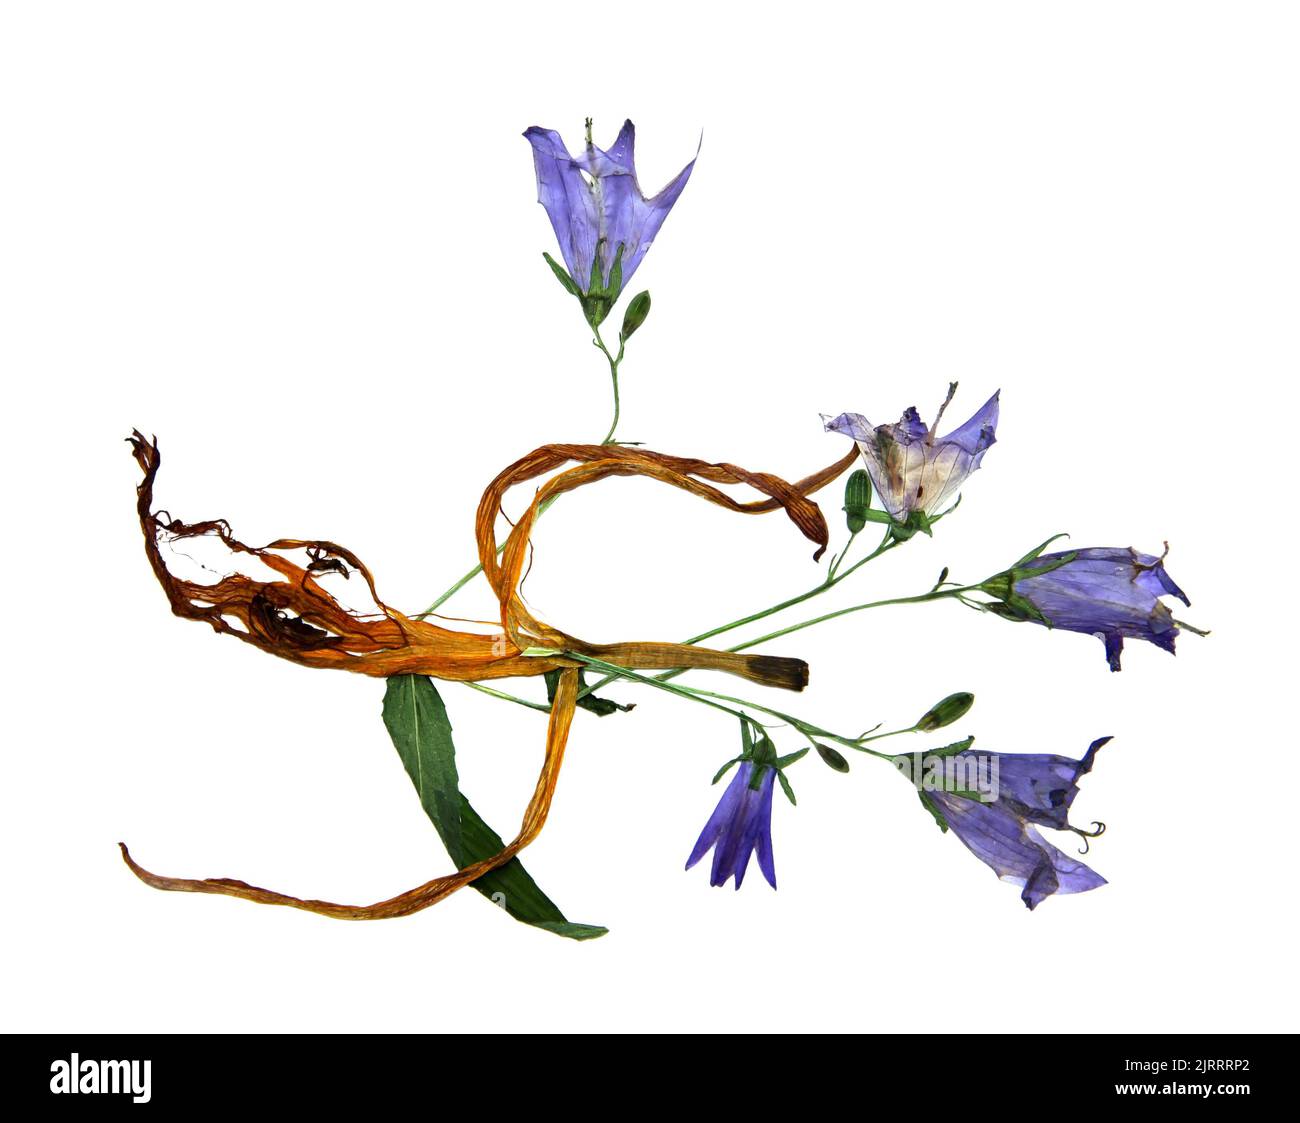 bizarre curved extruded dried lily petals. Pressed gentle blue campanula Stock Photo